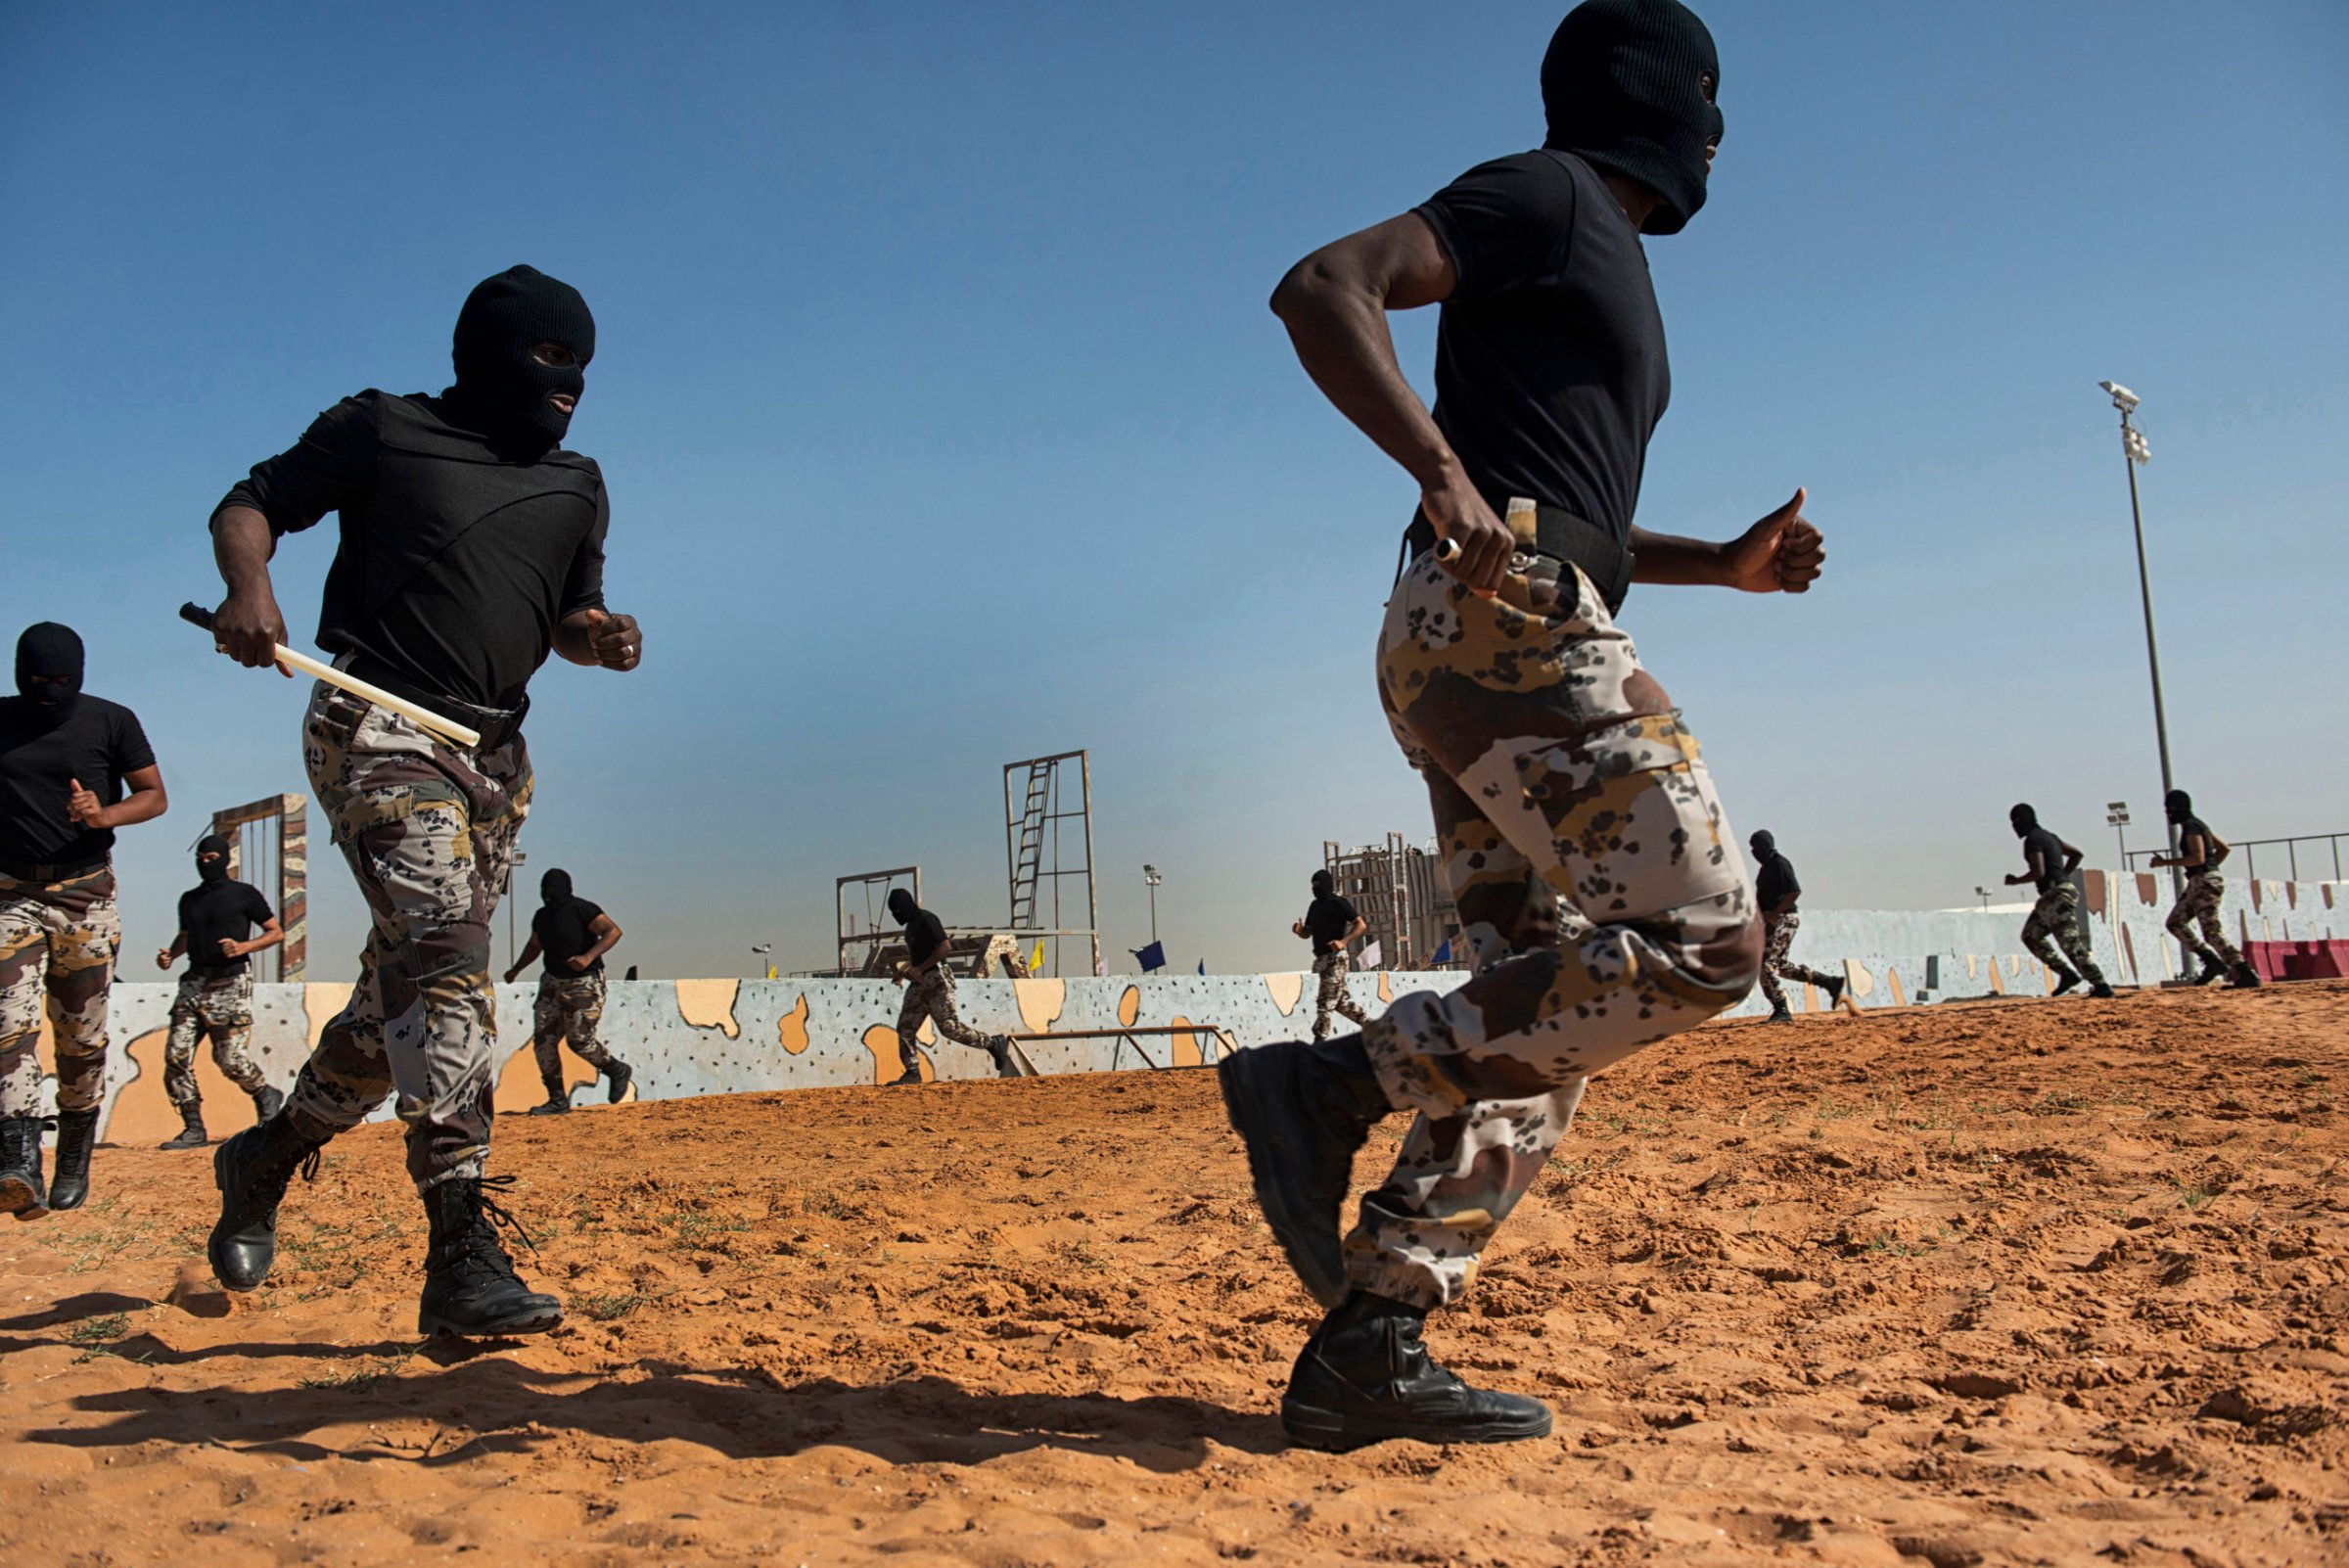 Troops with the Saudi Special Security Forces warm up and perform basic exercizes to increase strength and agility at the Counter-Terrorism Training School camp under the Ministry of Interior in Riyadh, Saudi Arabia, March 5, 2013.  The Saudi government has been fighting terrorism within the Kingdom for decades, and has roughly 3,000 SEF in Riyadh, alone.  Despite a fraugh relationship with the United States in the past, Saudi Arabia and the U.S. have routinely shared security information in order to prevent and fight terrorism.  With the recent death of HRH King Abdullah, the international community is looking to the newly appointed HRH King Salman to see how he develop the Kingdom's relationship with the West.  (Credit: Lynsey Addario/ Getty Reportage)